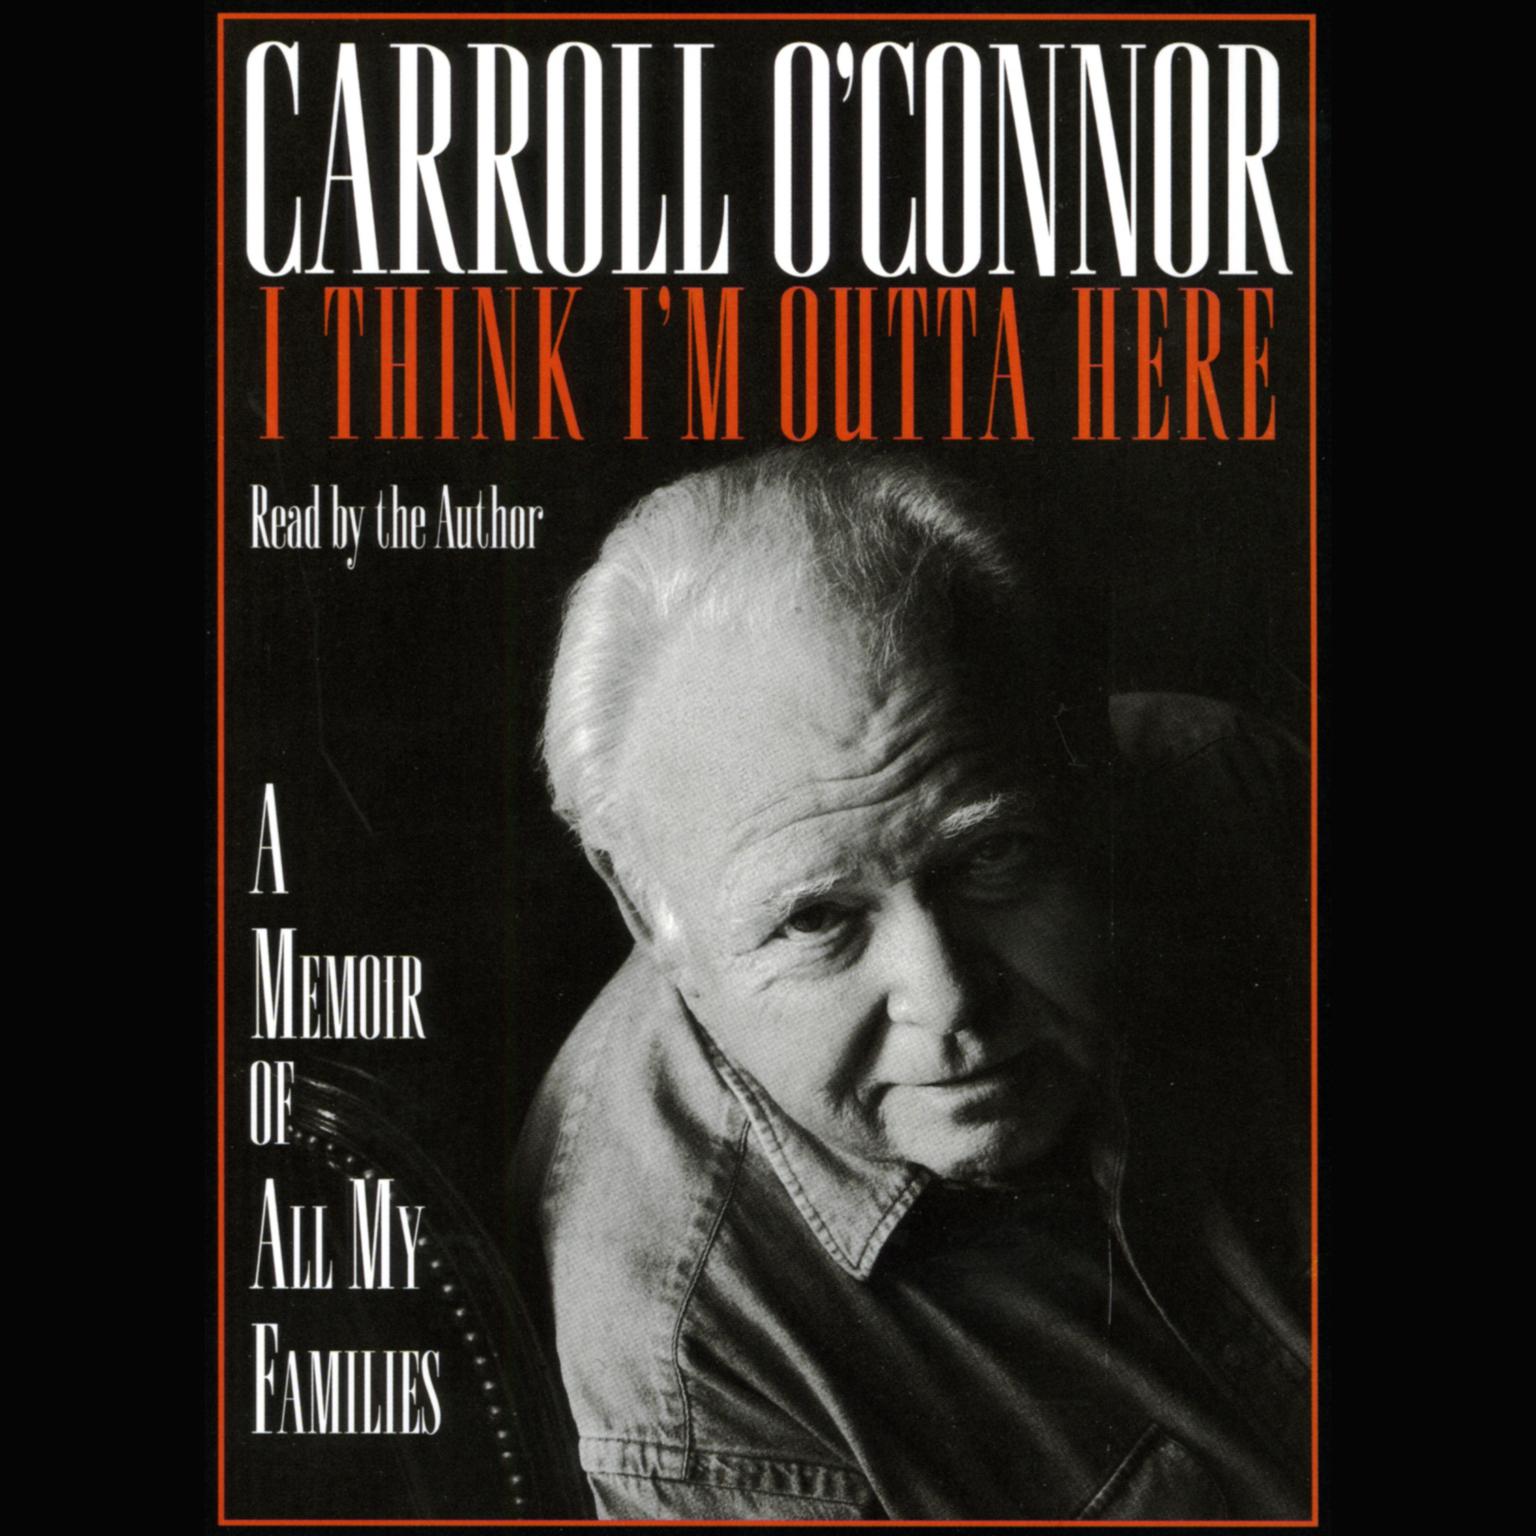 I Think Im Outta Here (Abridged): A Memoir of All My Families Audiobook, by Carroll O'Connor